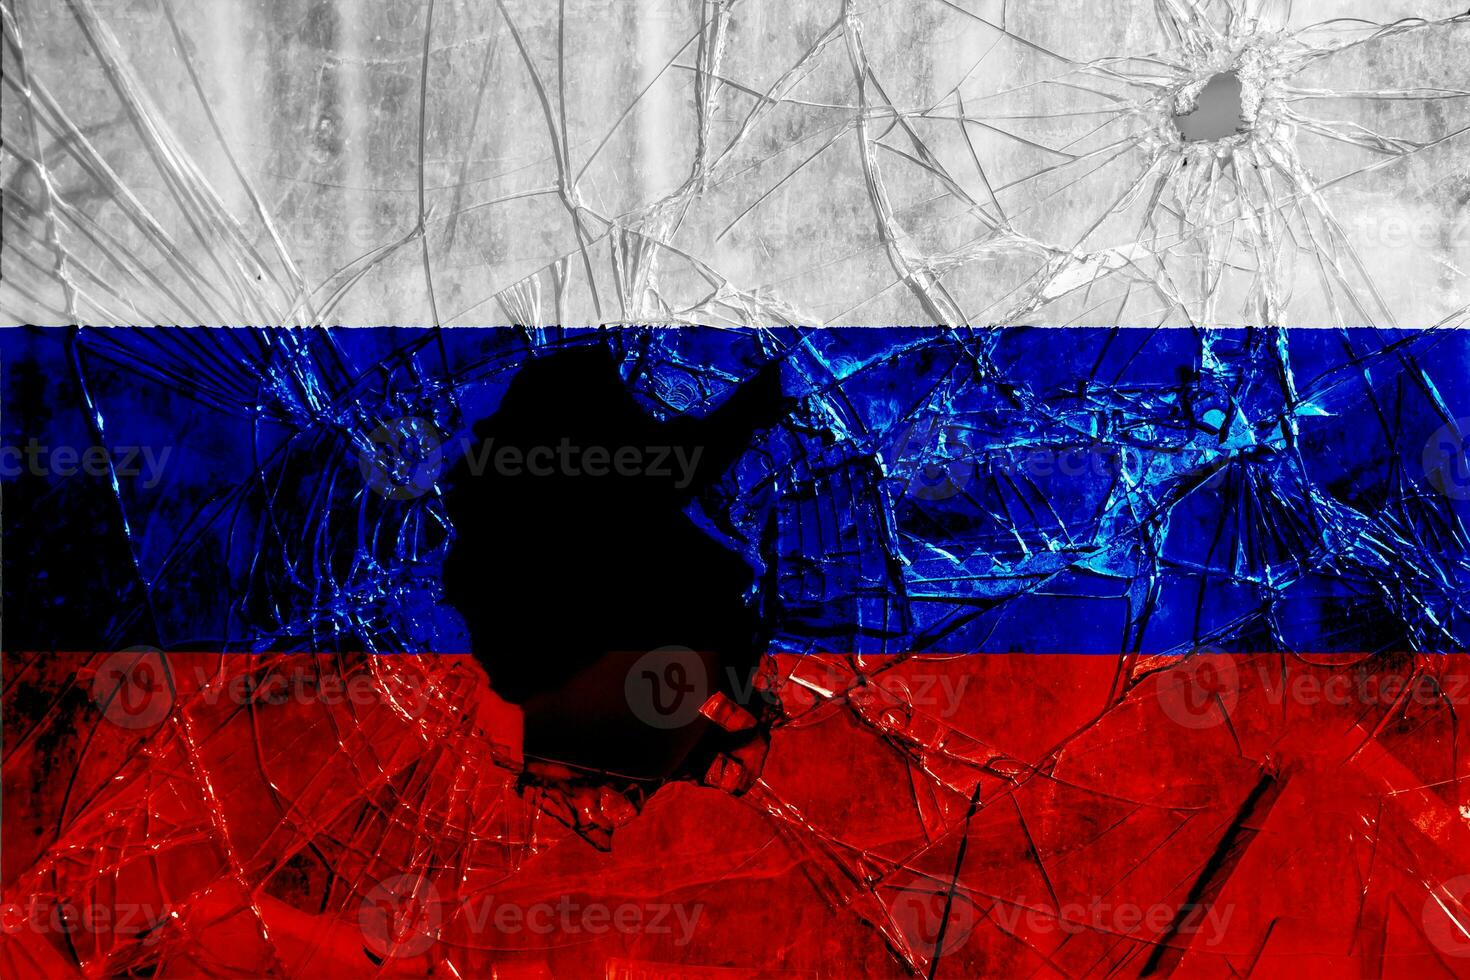 Flag of Russian Federation on a textured background. Concept collage. photo